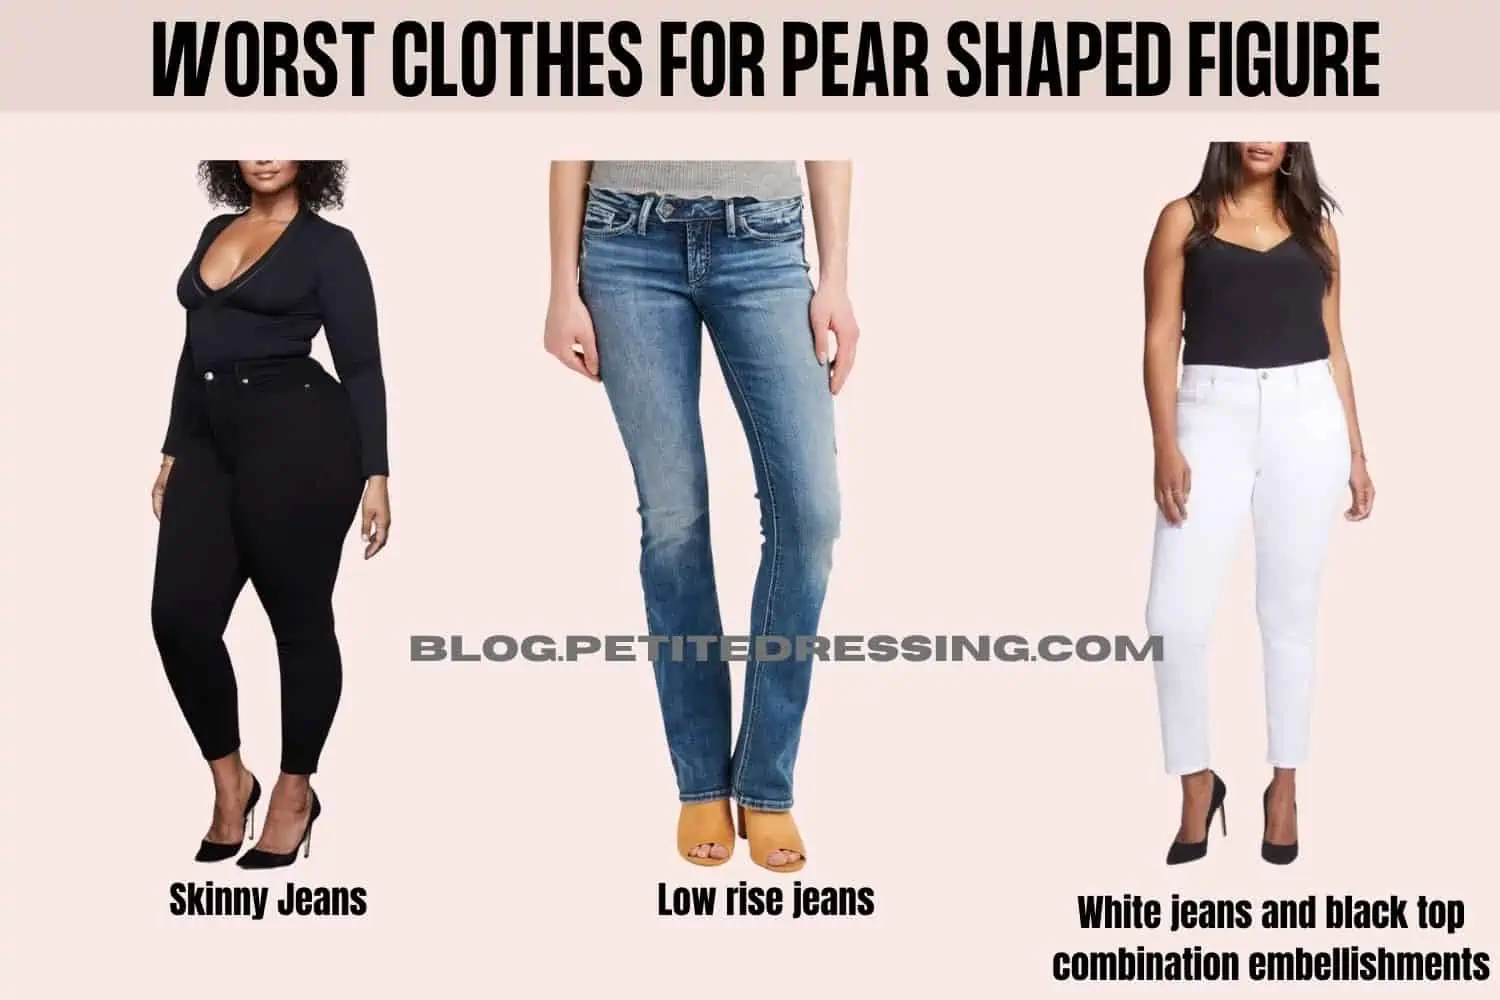 How to look slim if I have a pear shaped body (man) - Quora